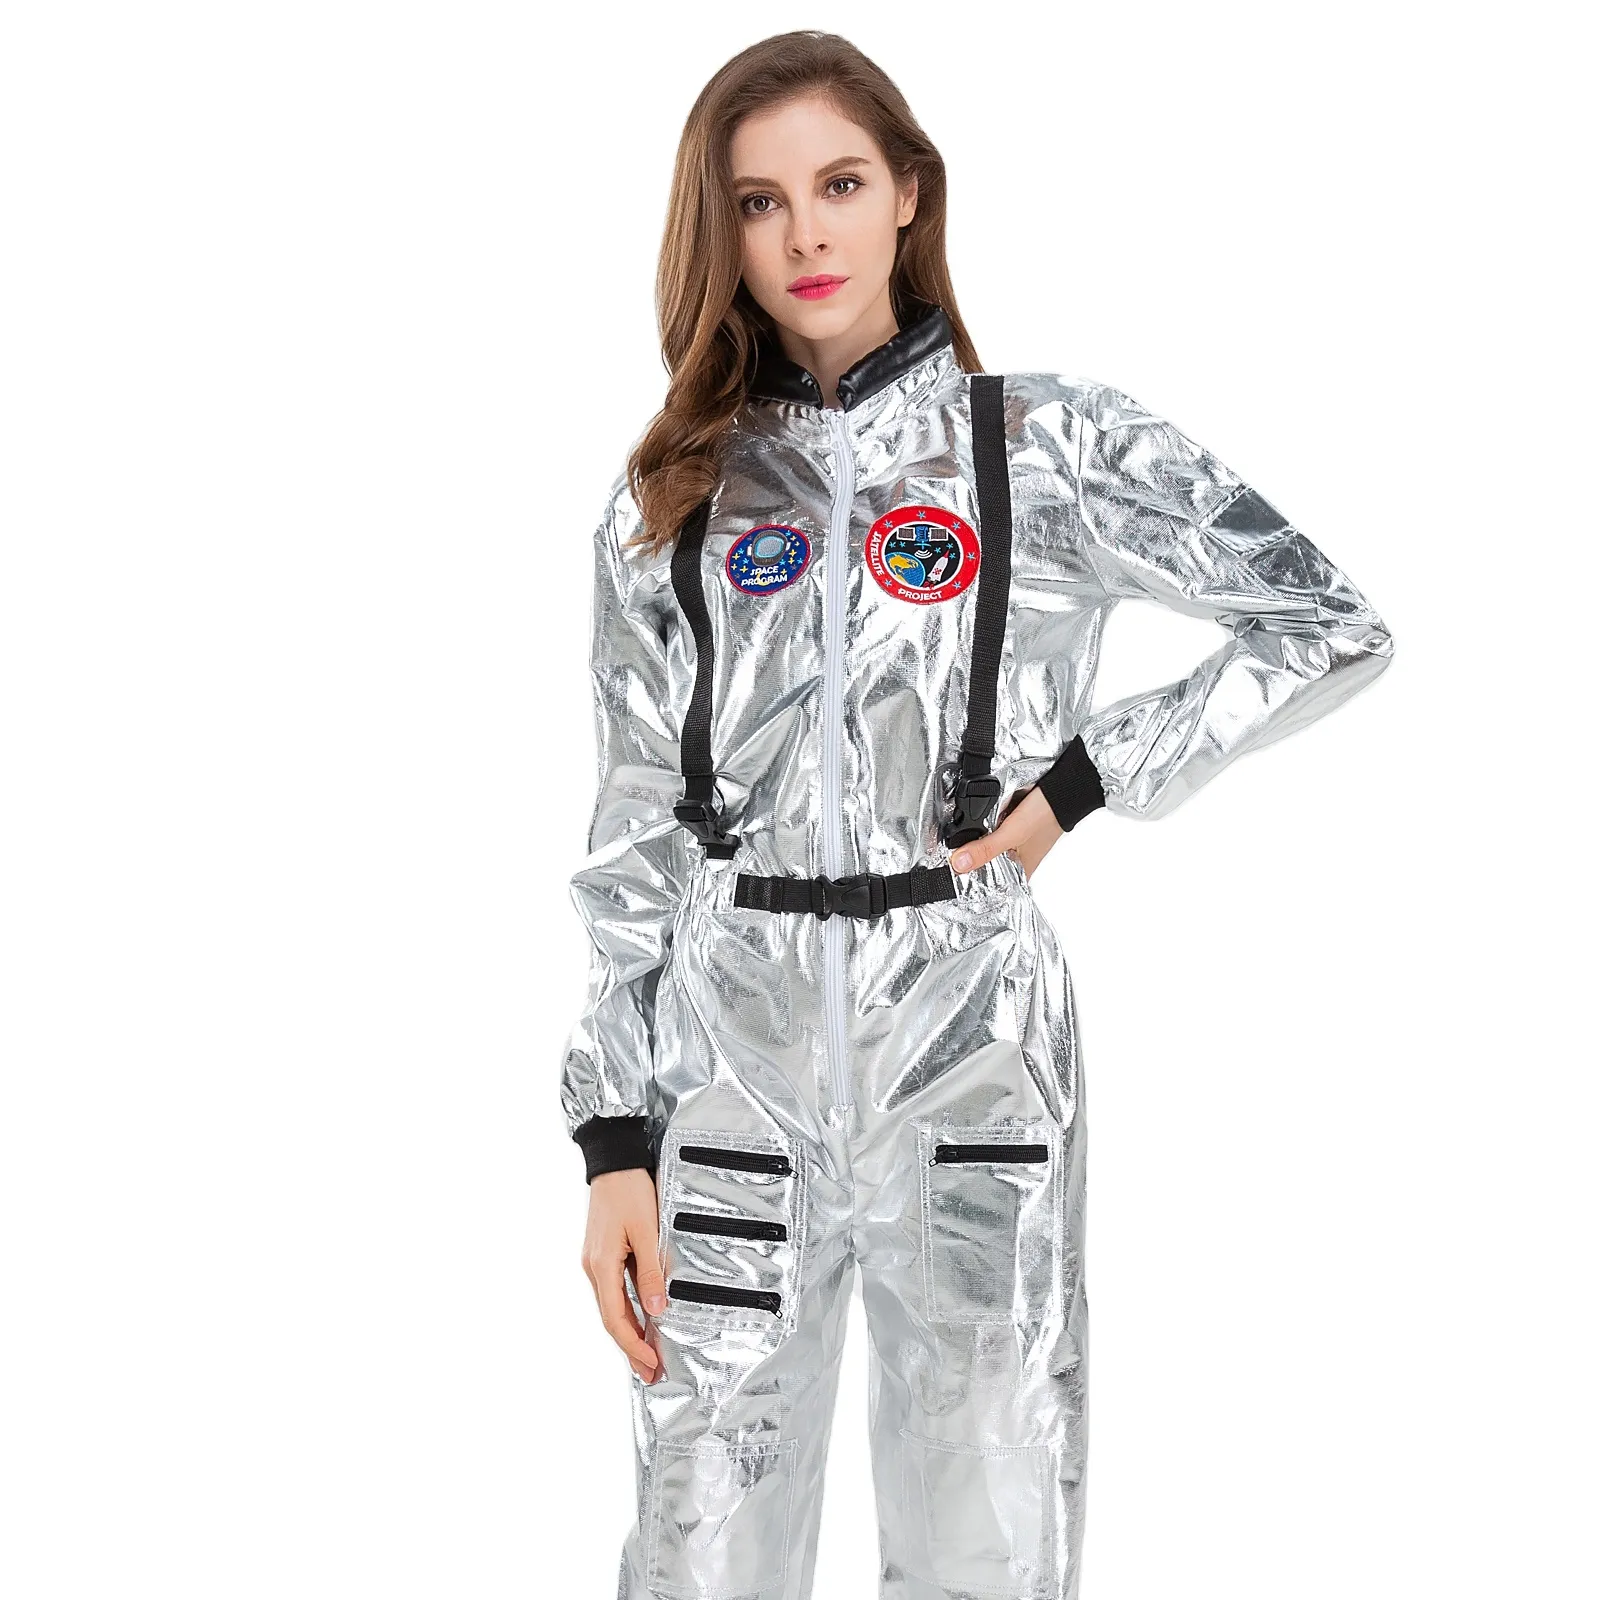 Halloween Cosplay Astronaut Costume Wandering Earth The same space suit collective party costume